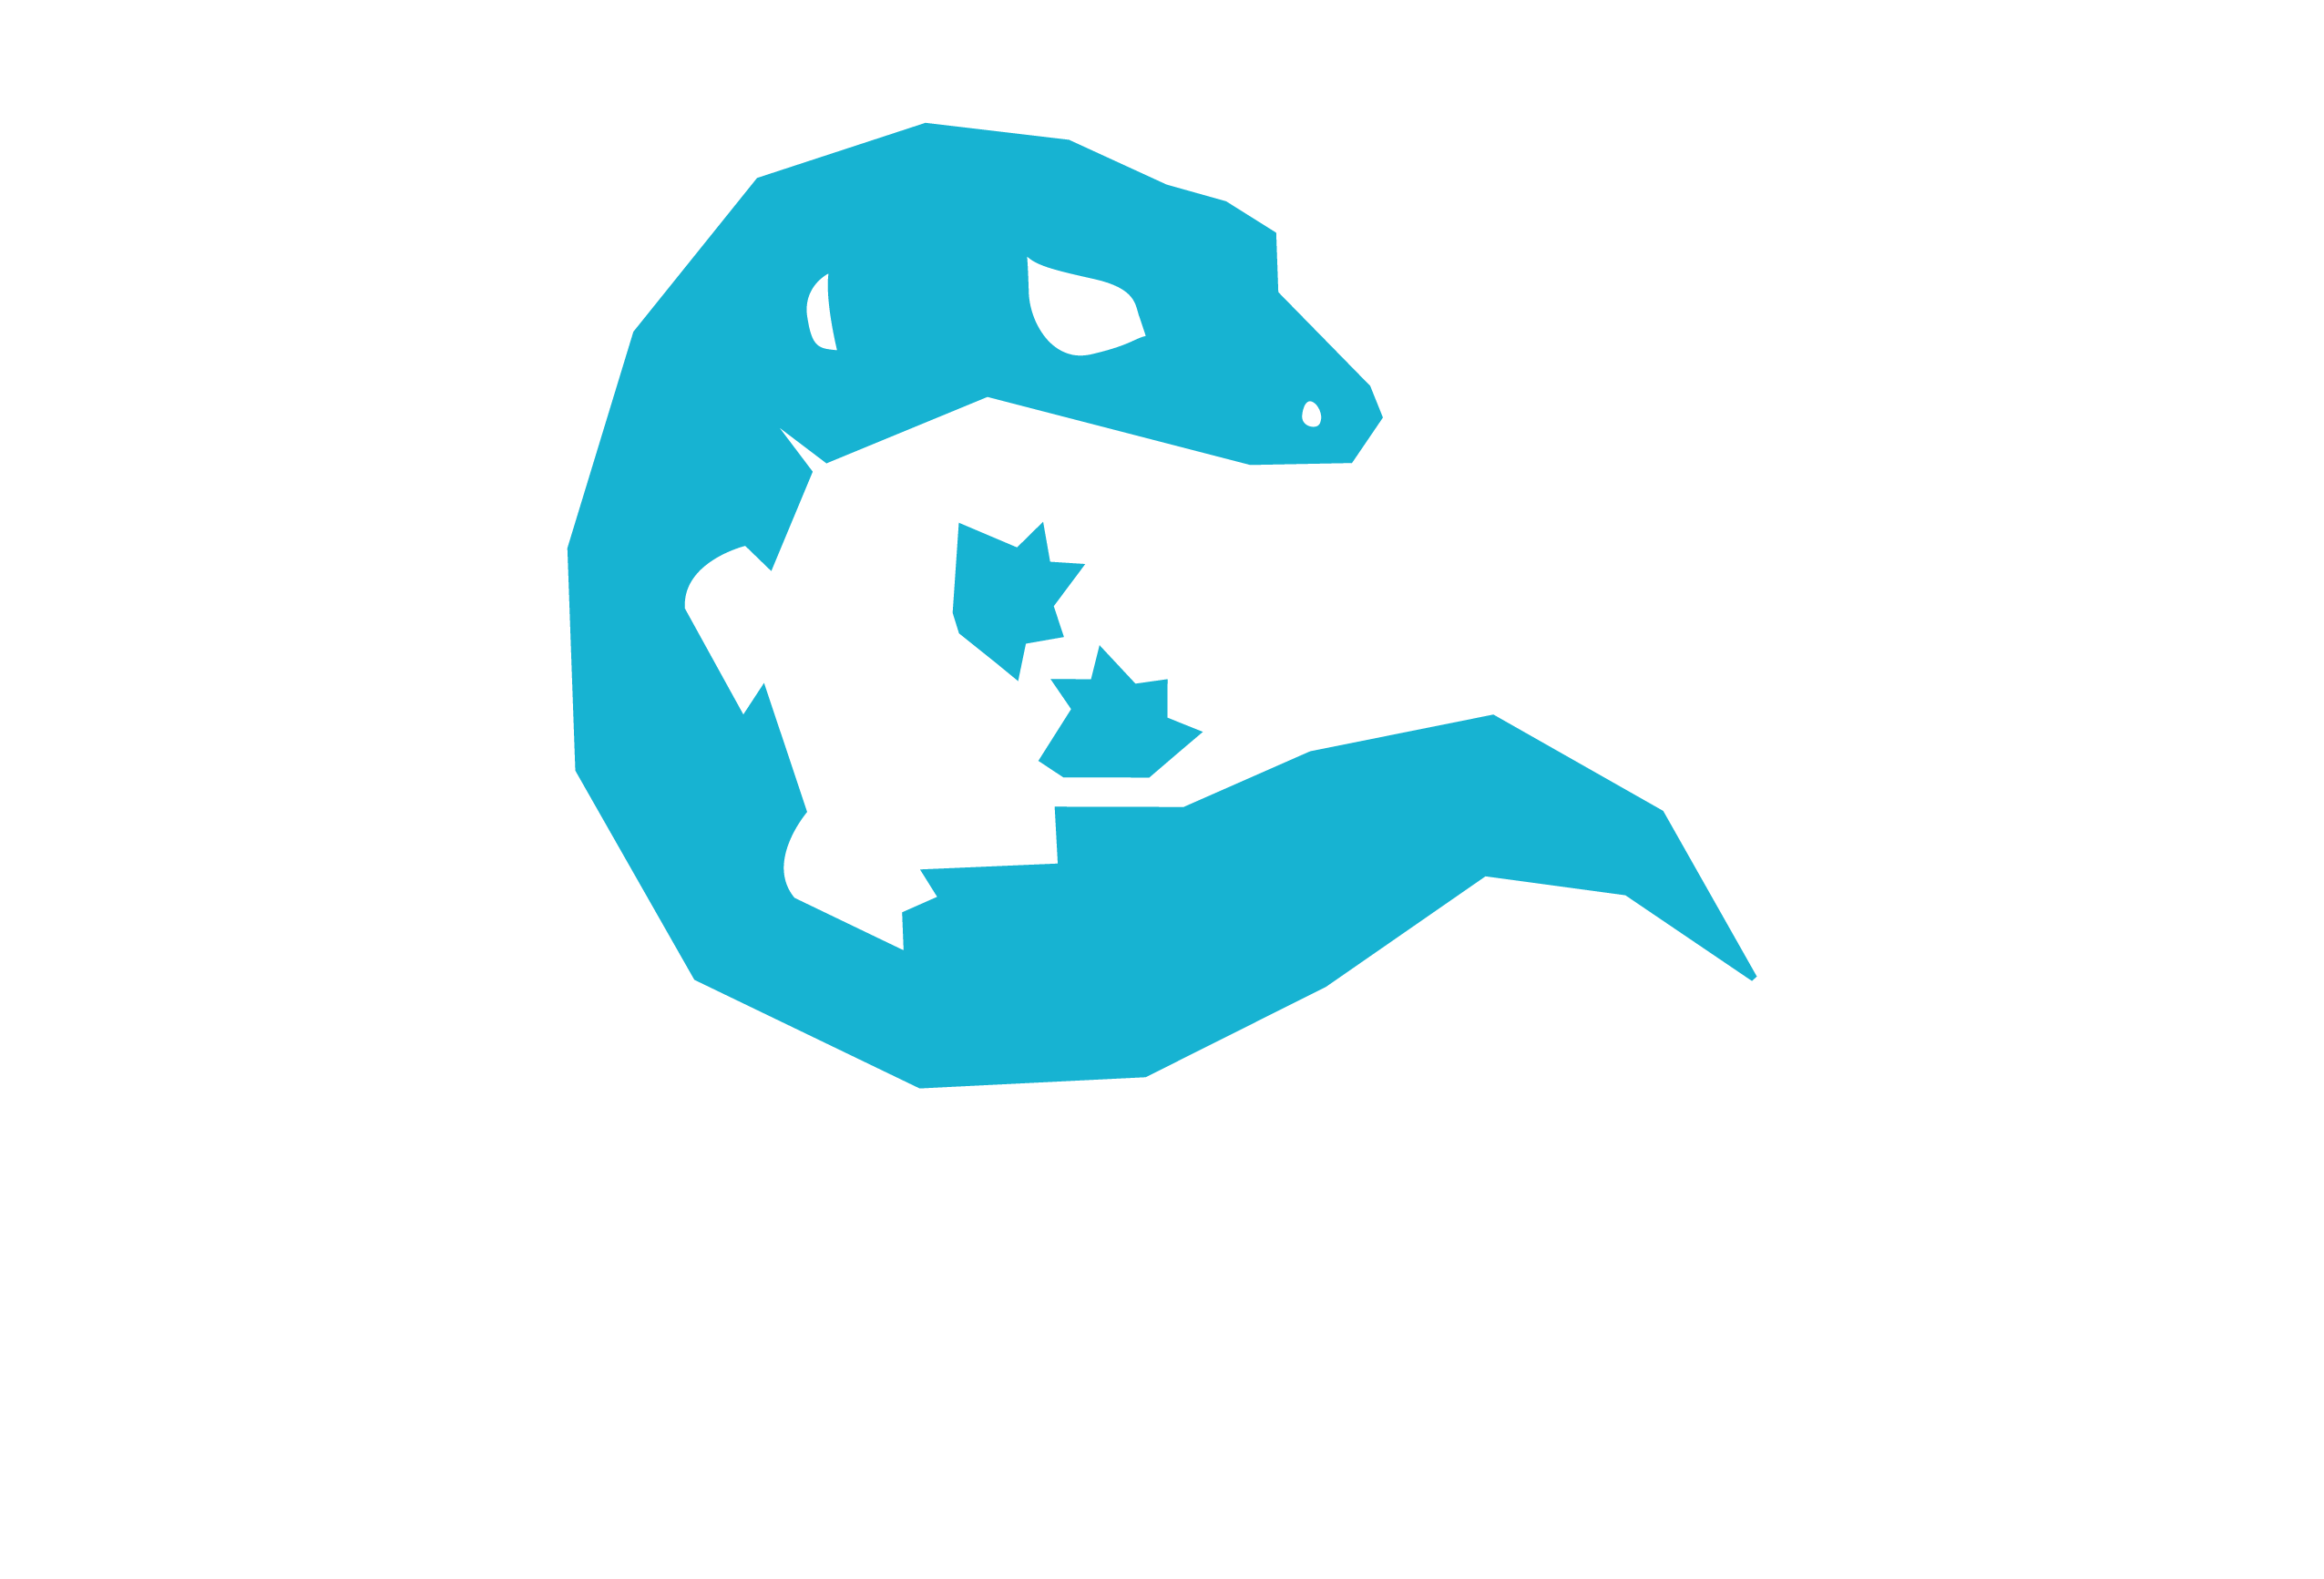 gecko clipart turquoise